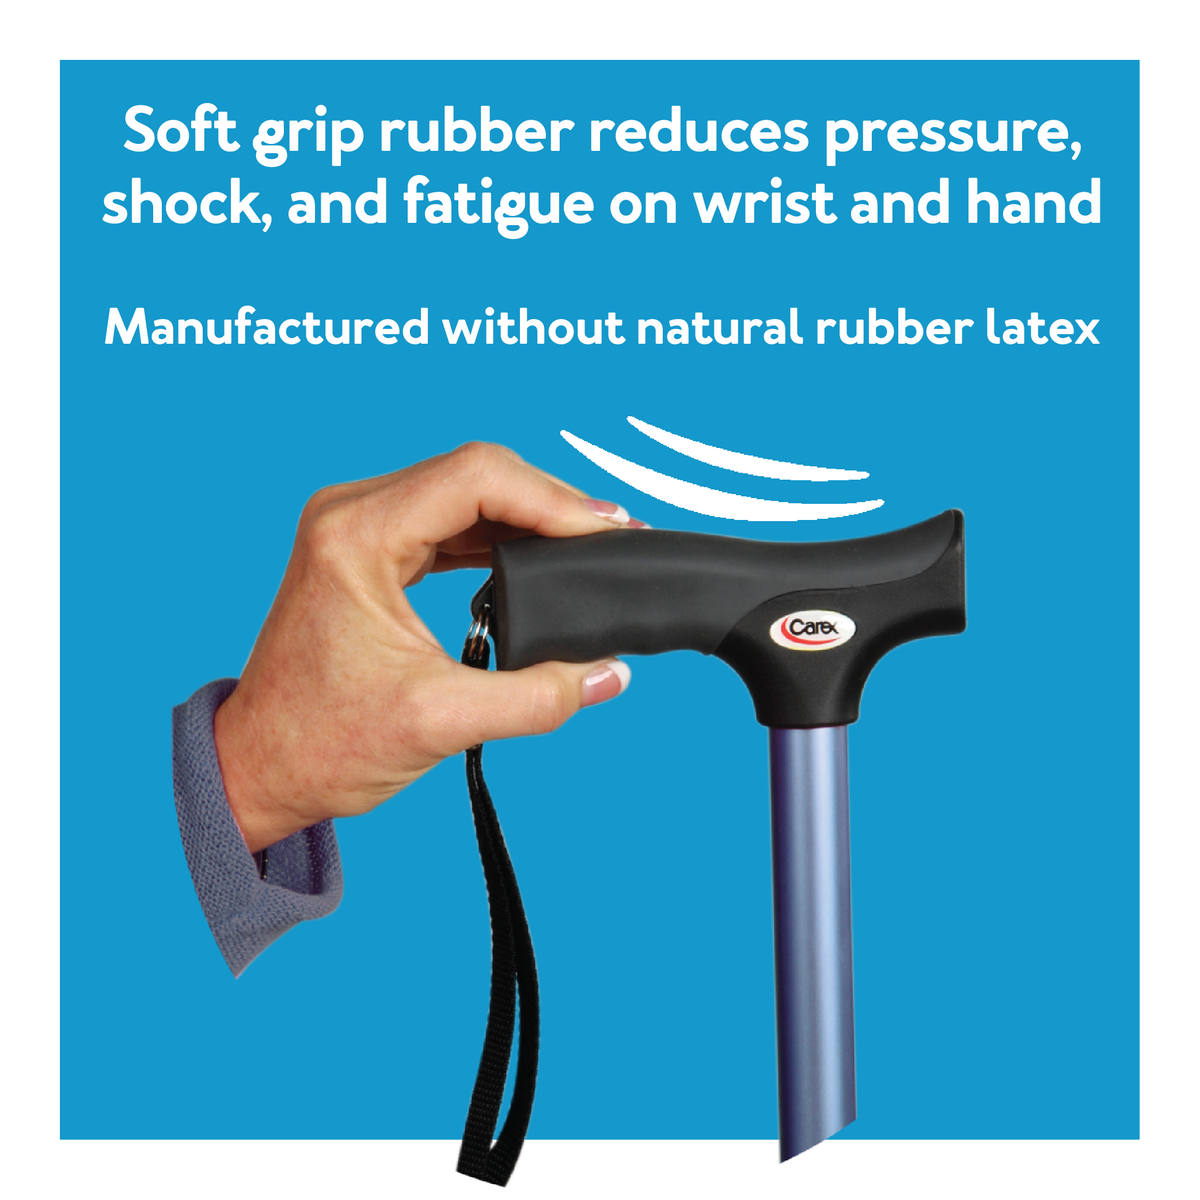 The Carex Soft Grip Derby Cane on a blue background : Further details are provided below